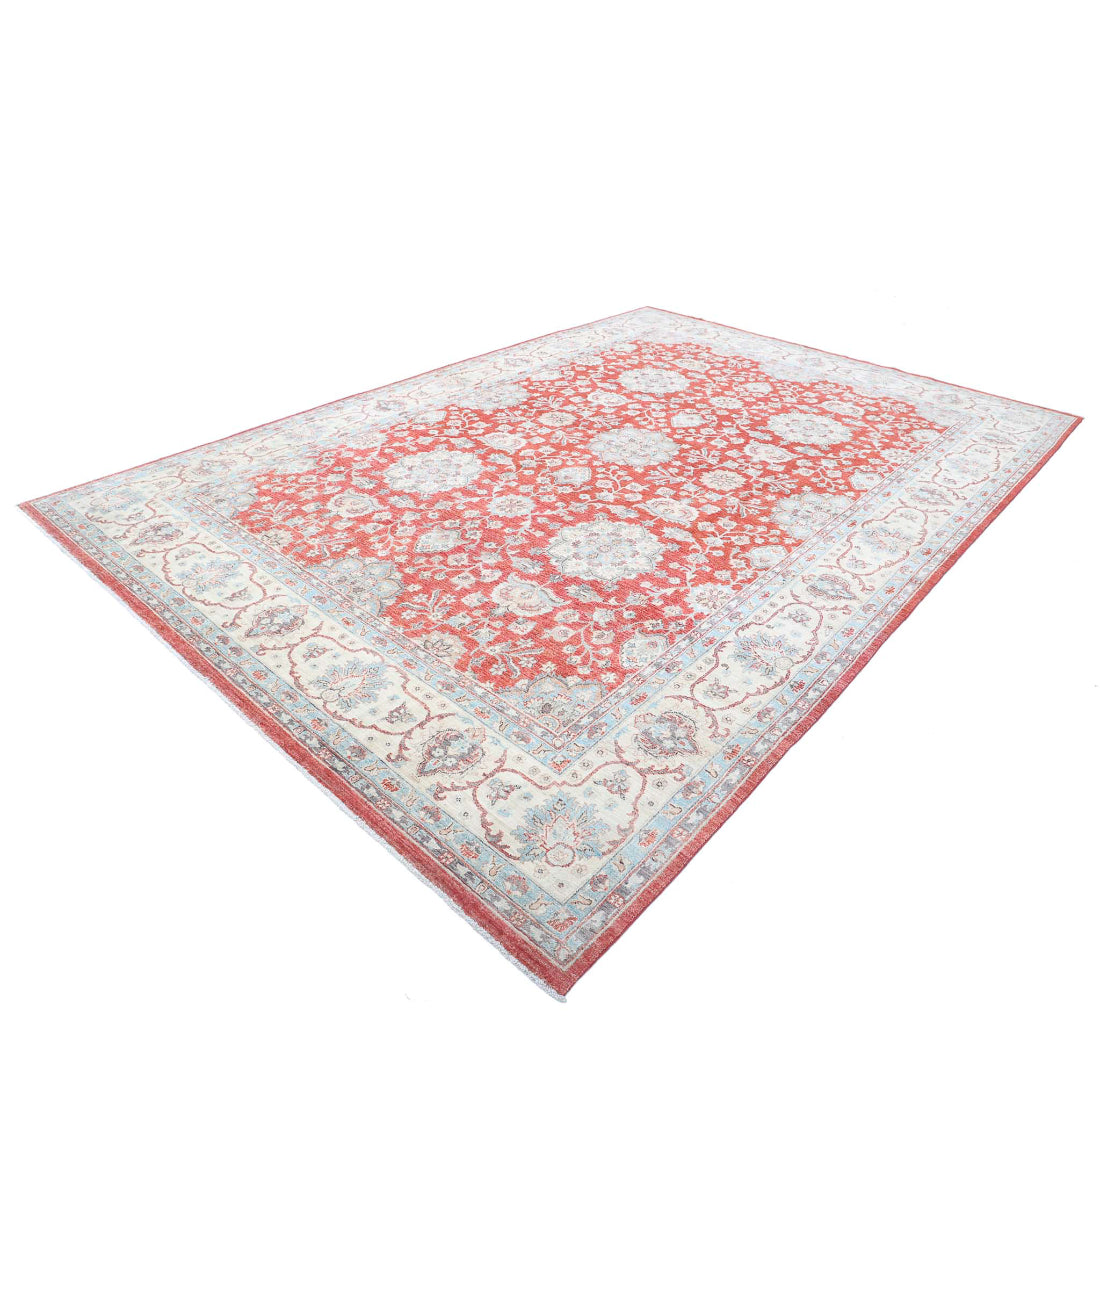 Ziegler 9'2'' X 13'4'' Hand-Knotted Wool Rug 9'2'' x 13'4'' (275 X 400) / Red / Ivory